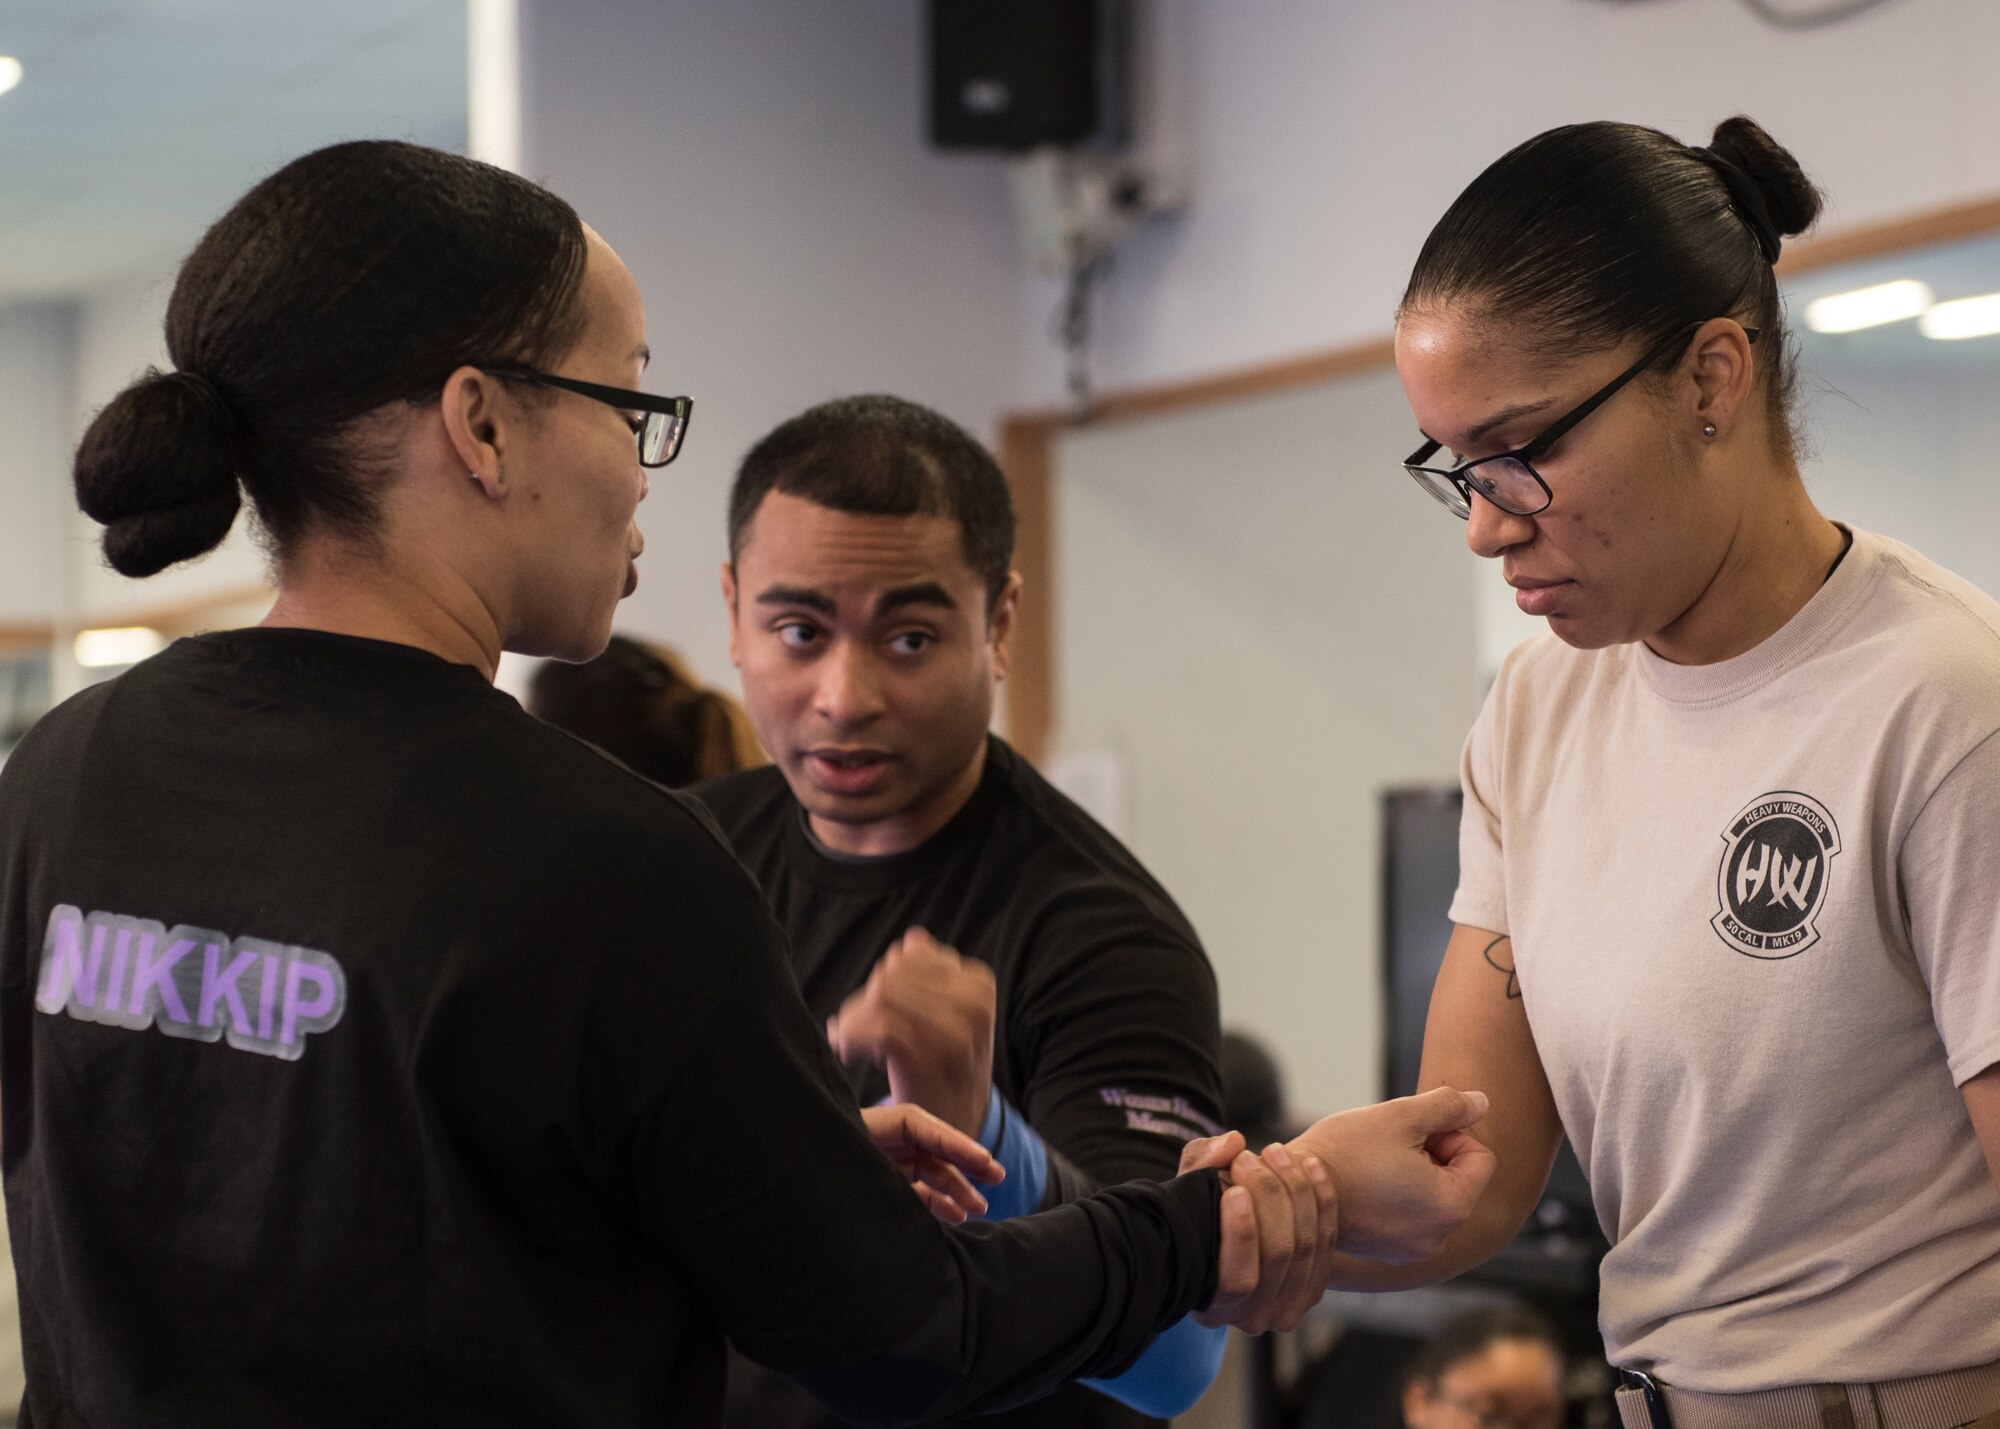 Tech. Sgt. James Baldwin, 39th Security Forces Squadron NCO in-charge of standardization and evaluations, teaches techniques during a self-defense class March 19, 2019, at Incirlik Air Base, Turkey.